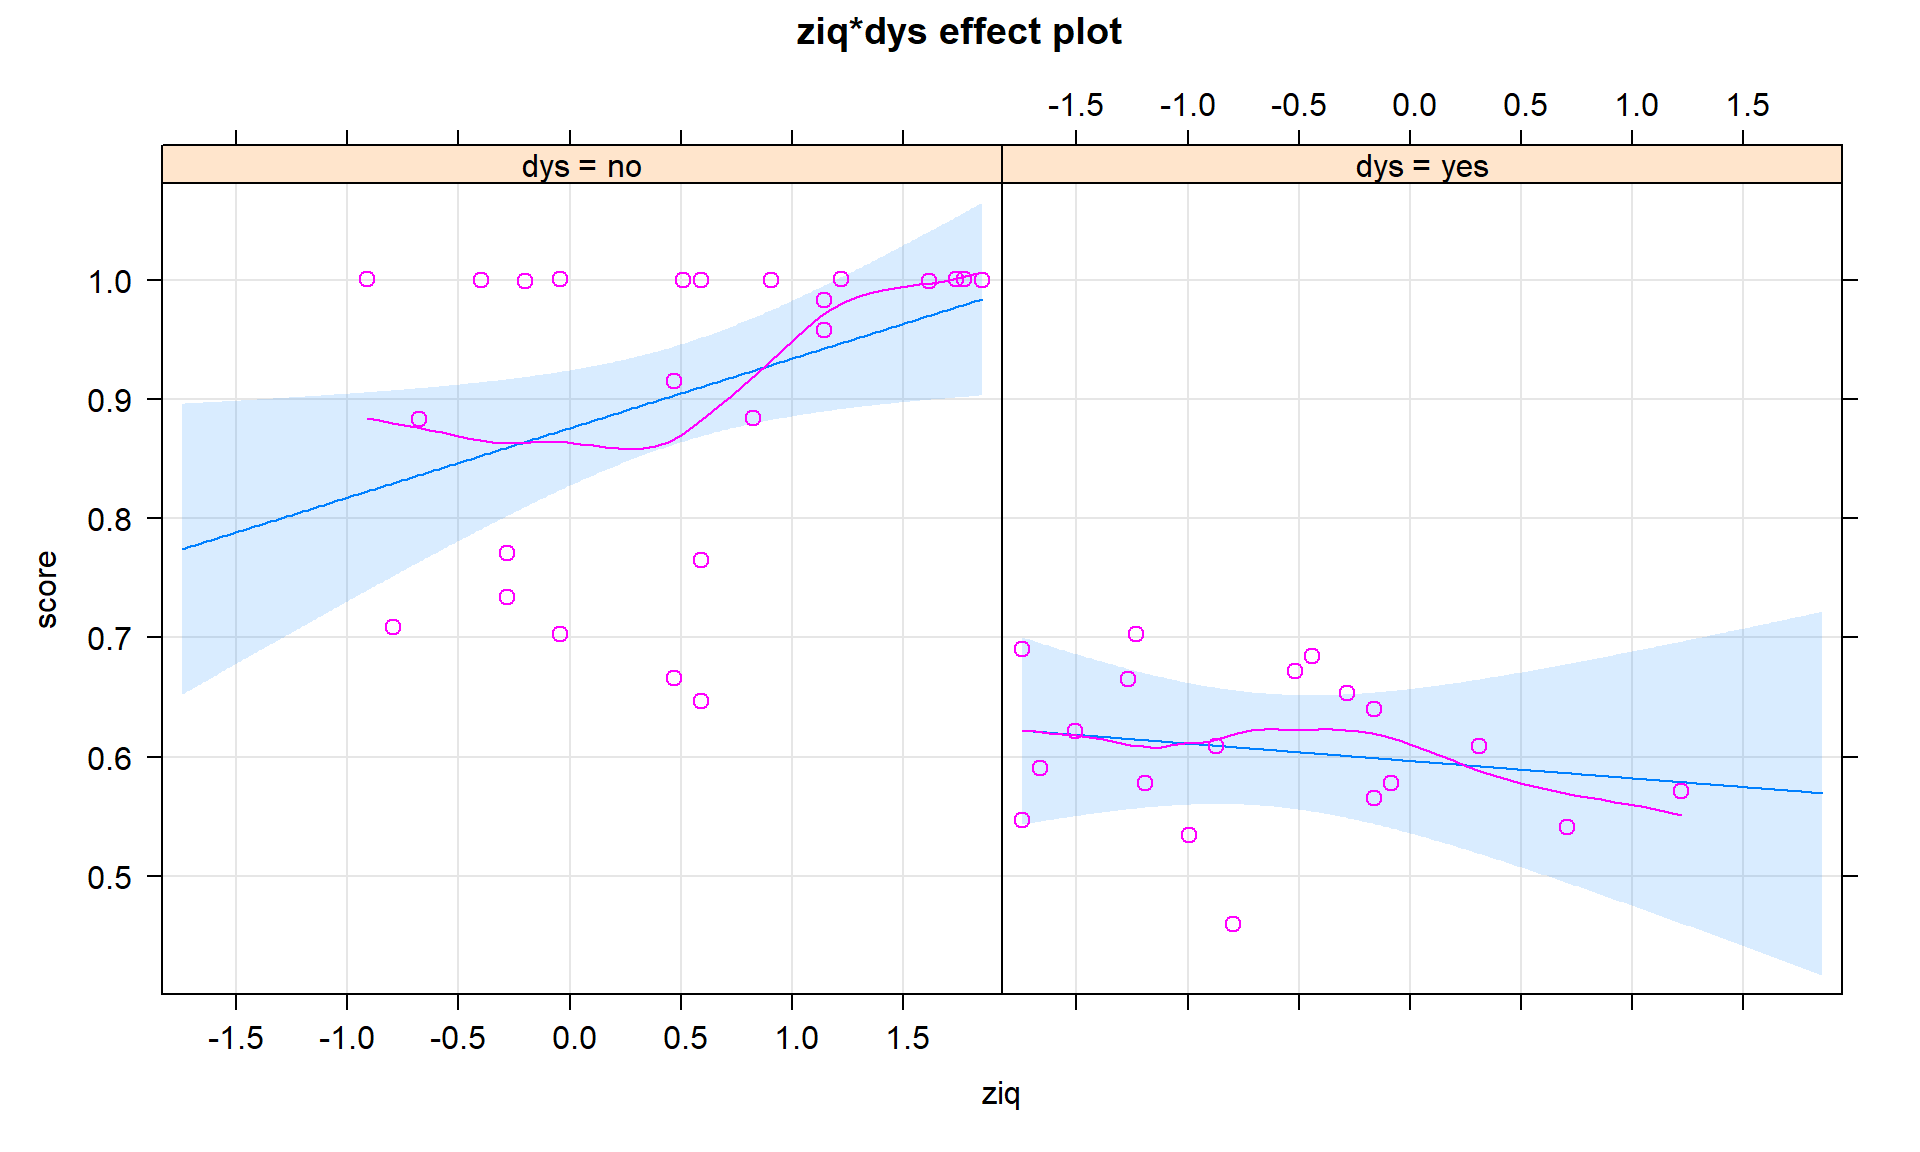 Term-plots for interaction model for reading scores with partial residuals and the results for the two groups in different panels of the plot.